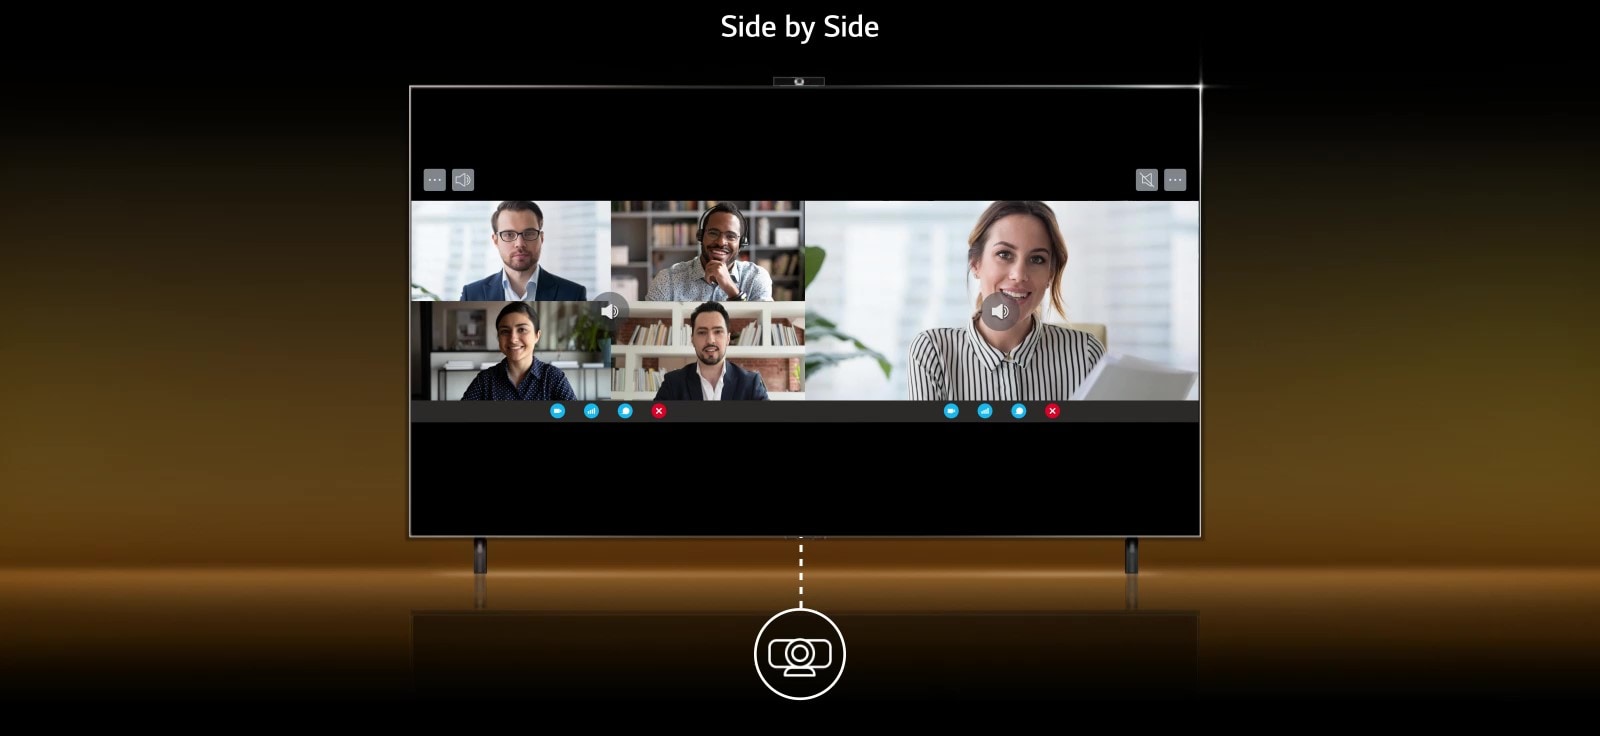 Three functions of multi-view are rolled and shown. Side by Side has a camera pictogram below and shows two screens making a video call. Picture in Picture has a camera pictogram below and I can see myself copying the exercise video. Finally, Dual Monitor shows a pictogram image and two document screens associated with the computer.